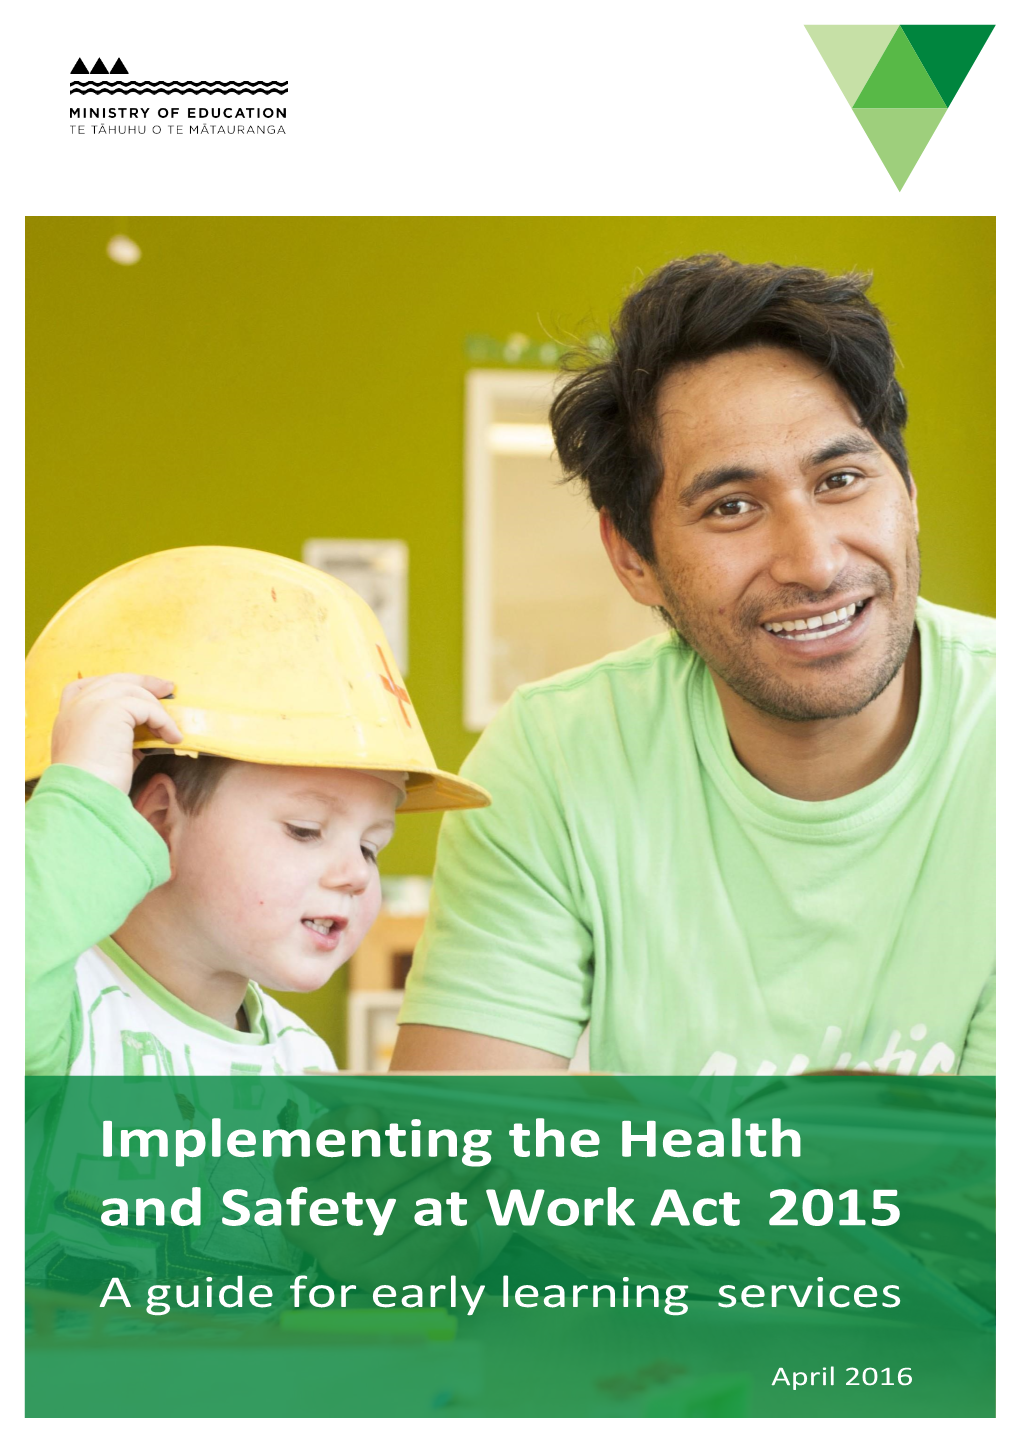 Implementing the Health and Safety at Work Act 2015: a Guide for Early Learning Services